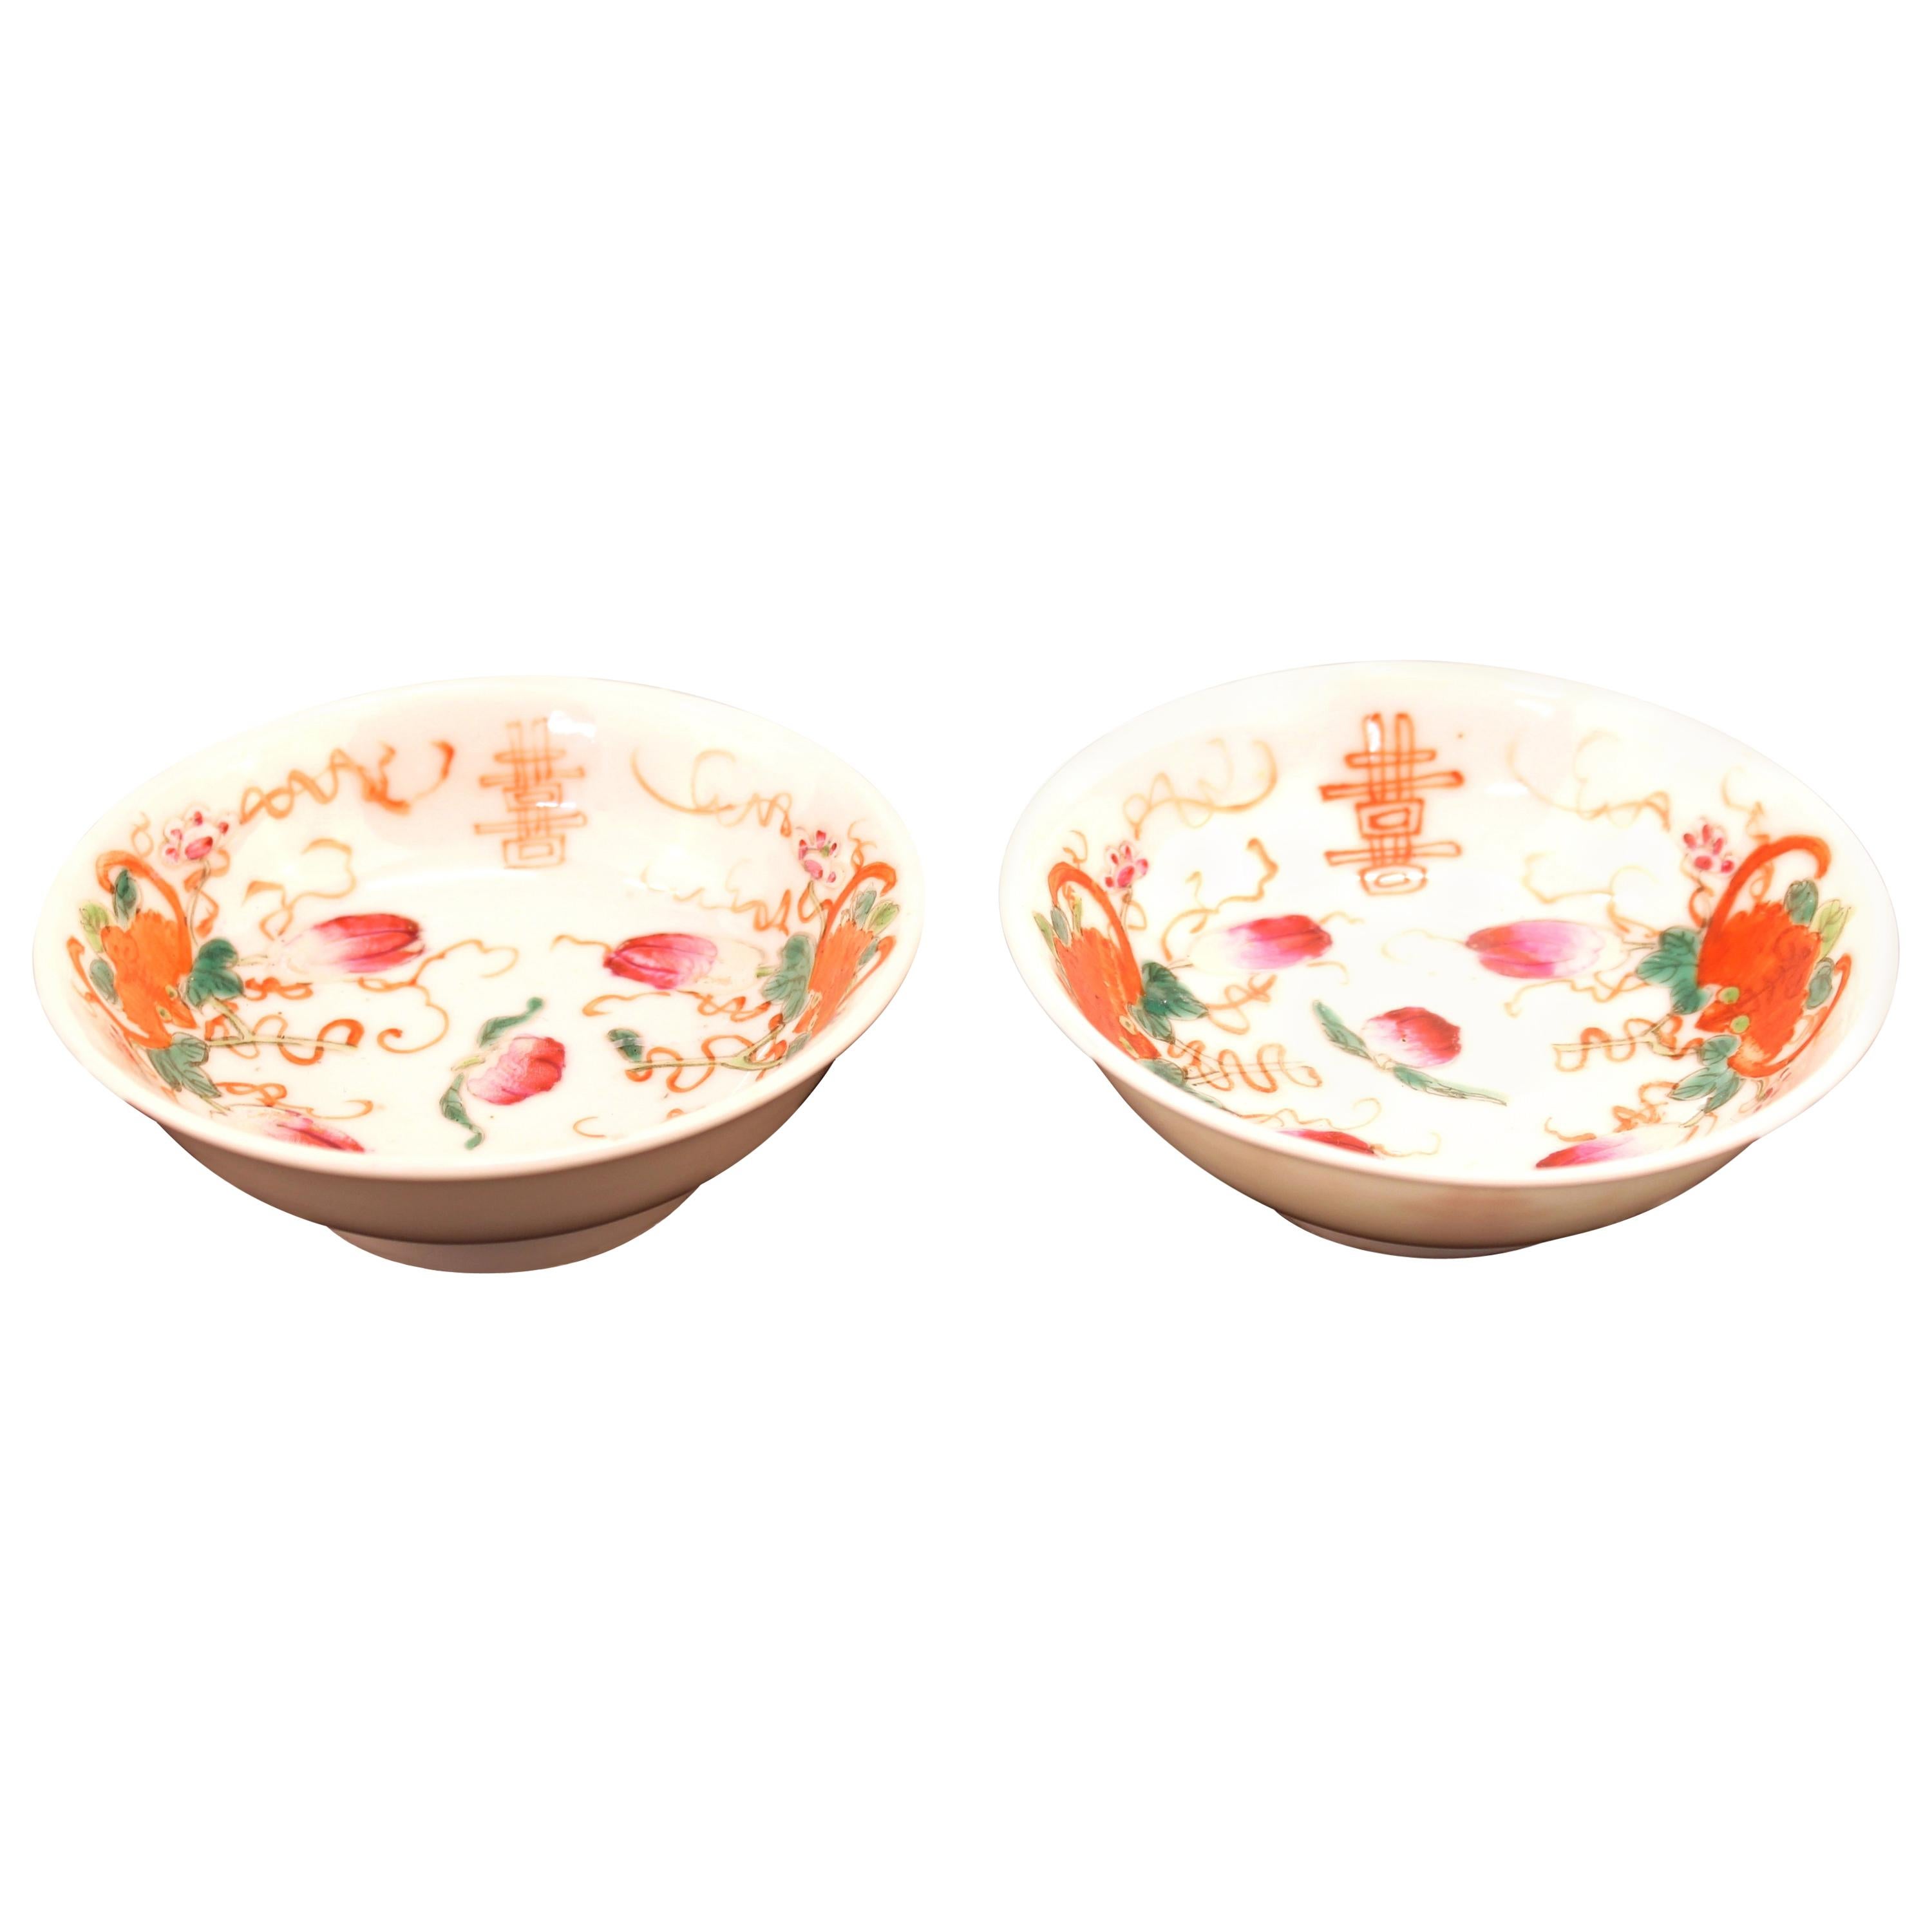 Chinese Export Porcelain Famille Rose Tea Plates